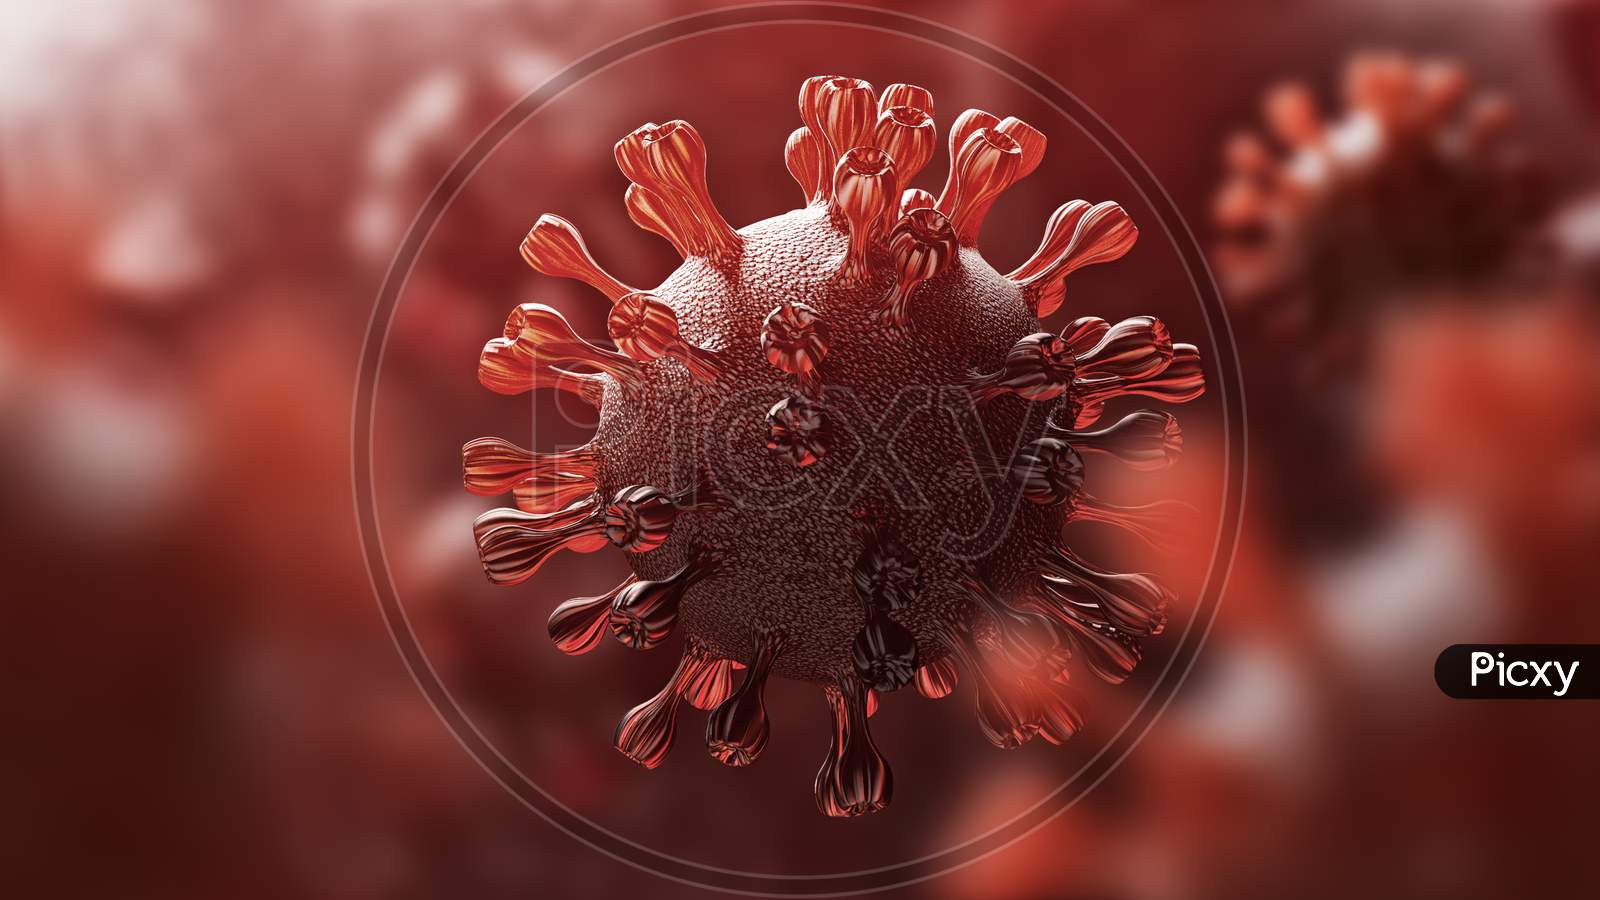 Super Closeup Coronavirus Covid-19 In Human Lung Body Background. Science And Microbiology Concept. Red Corona Virus Outbreak Epidemic. Medical Health And Virology. 3D Illustration Rendering